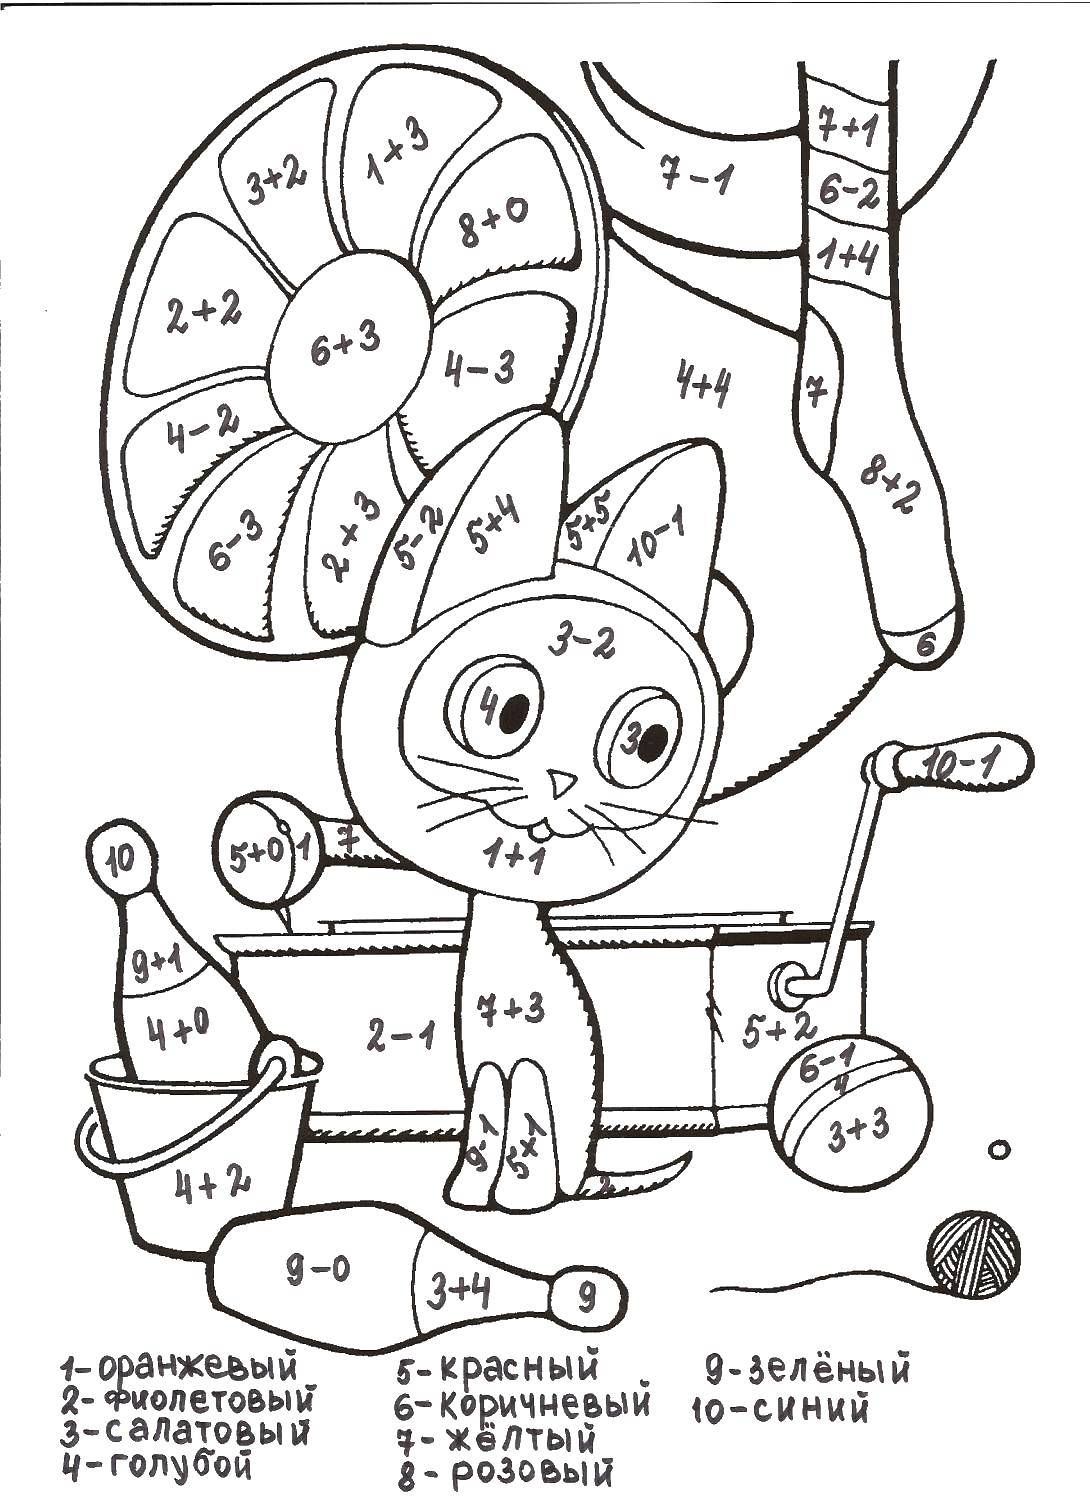 Coloring Kitten named woof. Category mathematical coloring pages. Tags:  Woof, kitty.